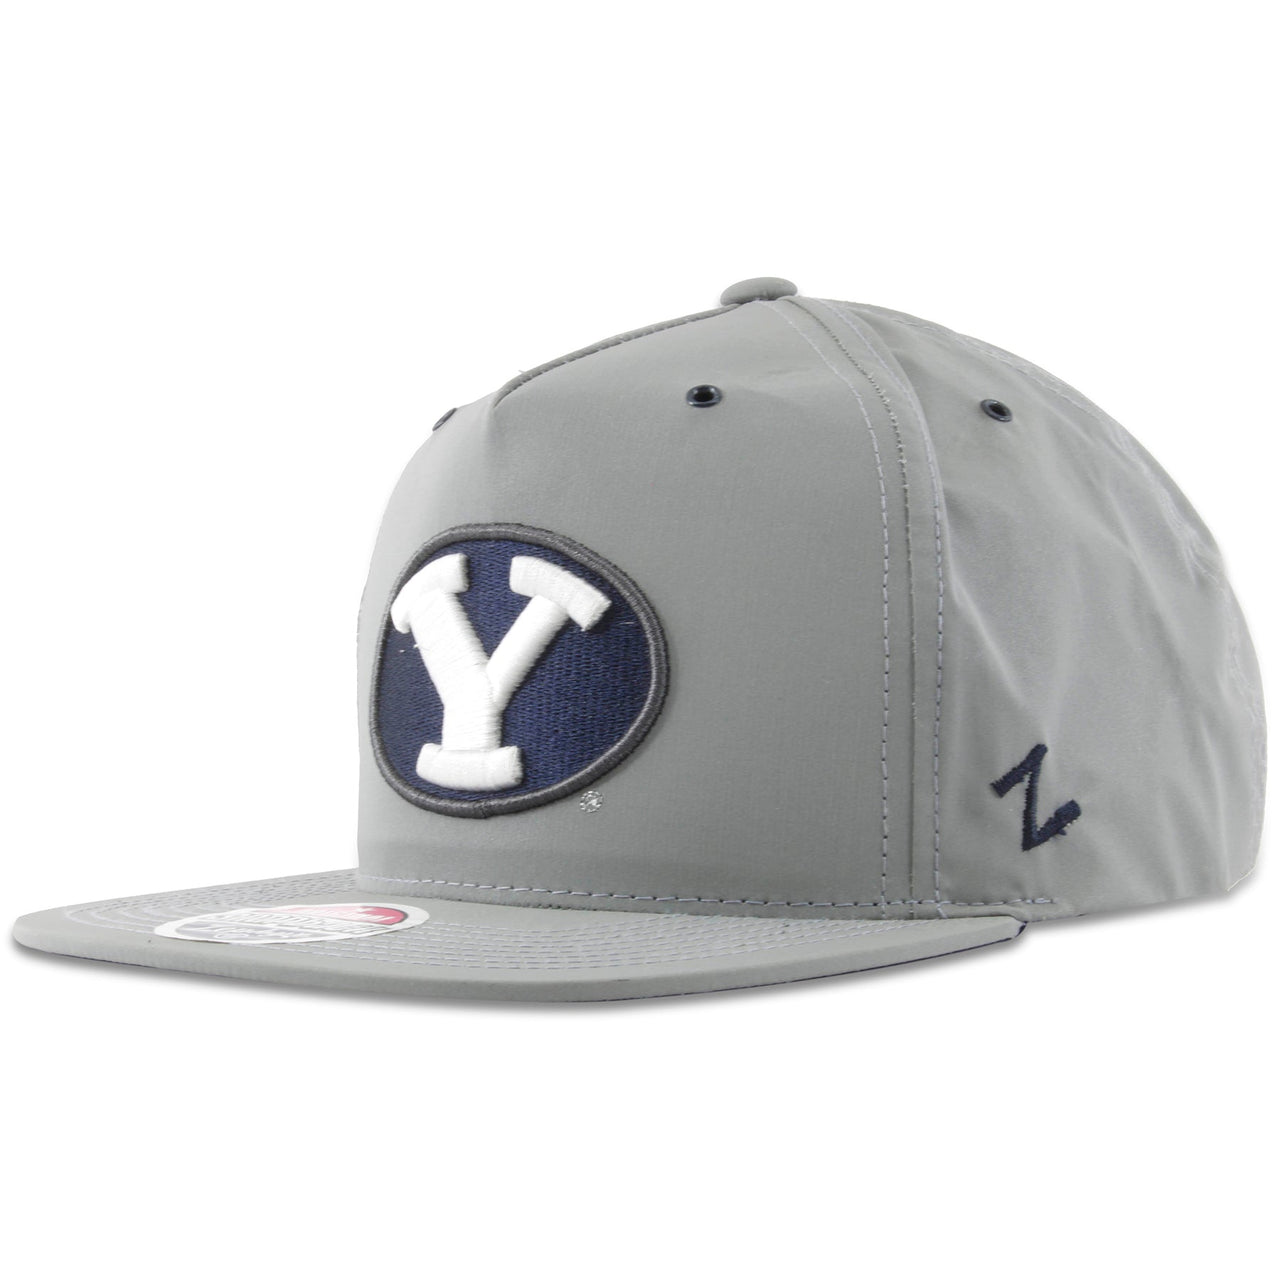 On the left side of the BYU gray reflective adjustable snapback hat is the Zephyr logo embroidered in navy blue